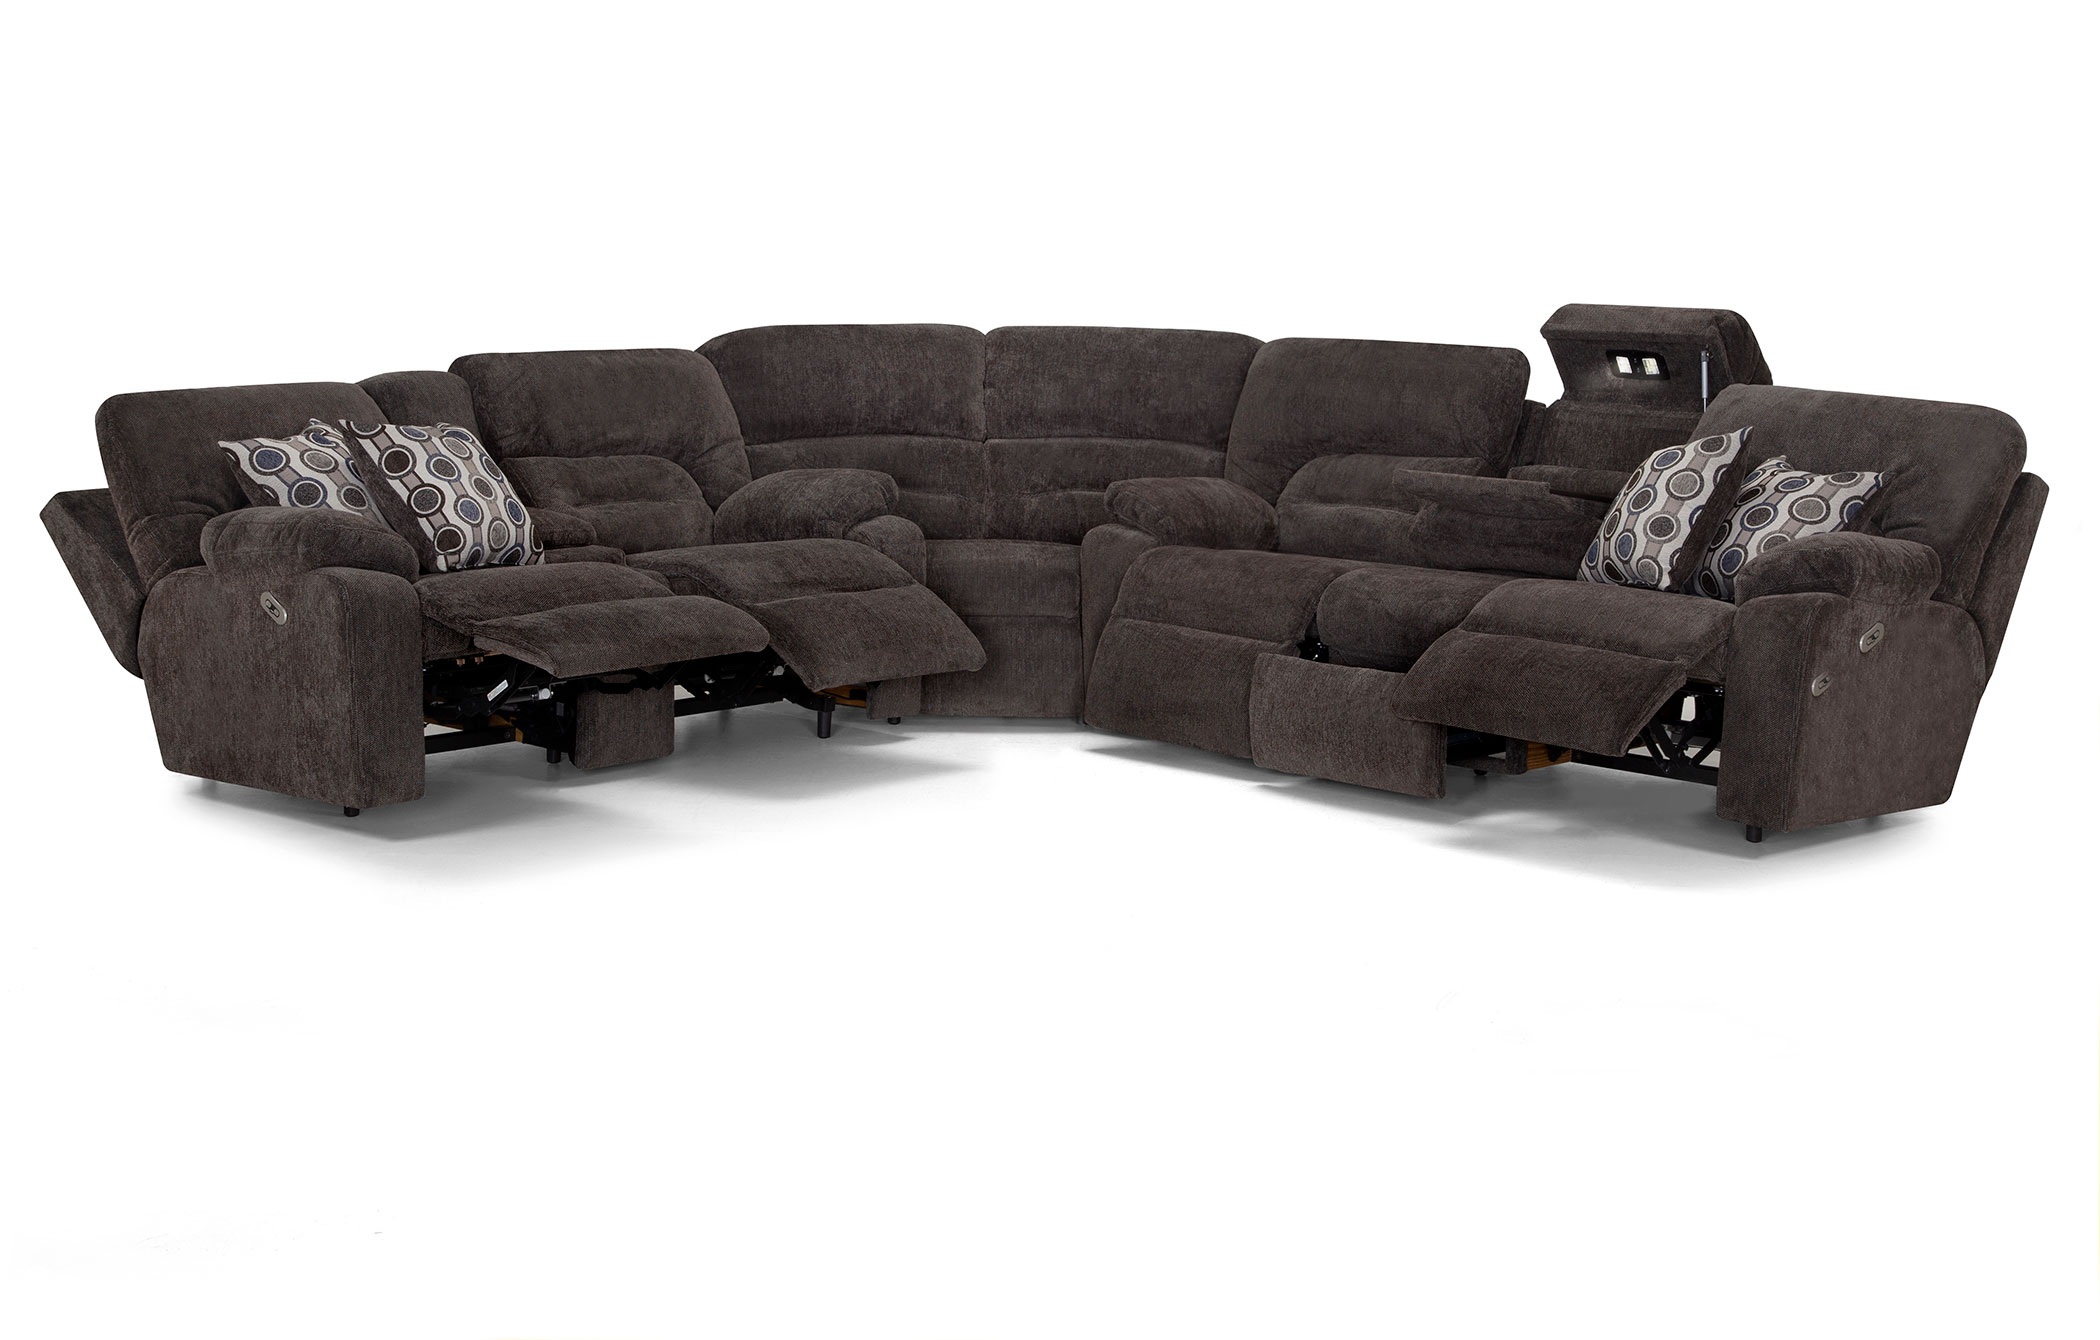  797 Tribute Sectional in 3740-15 - Open 